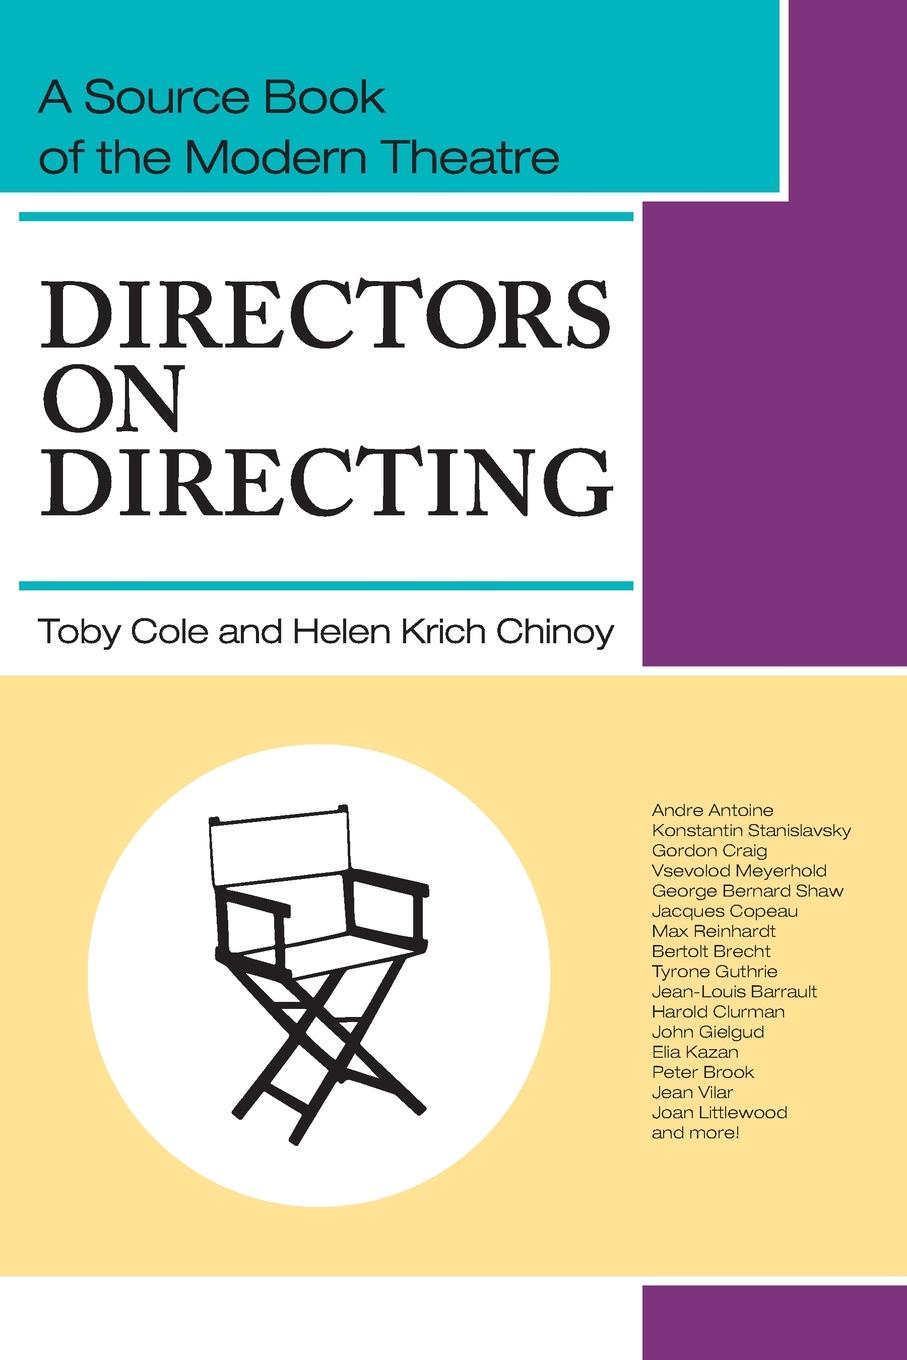 Directors on Directing. A Source Book of the Modern Theatre